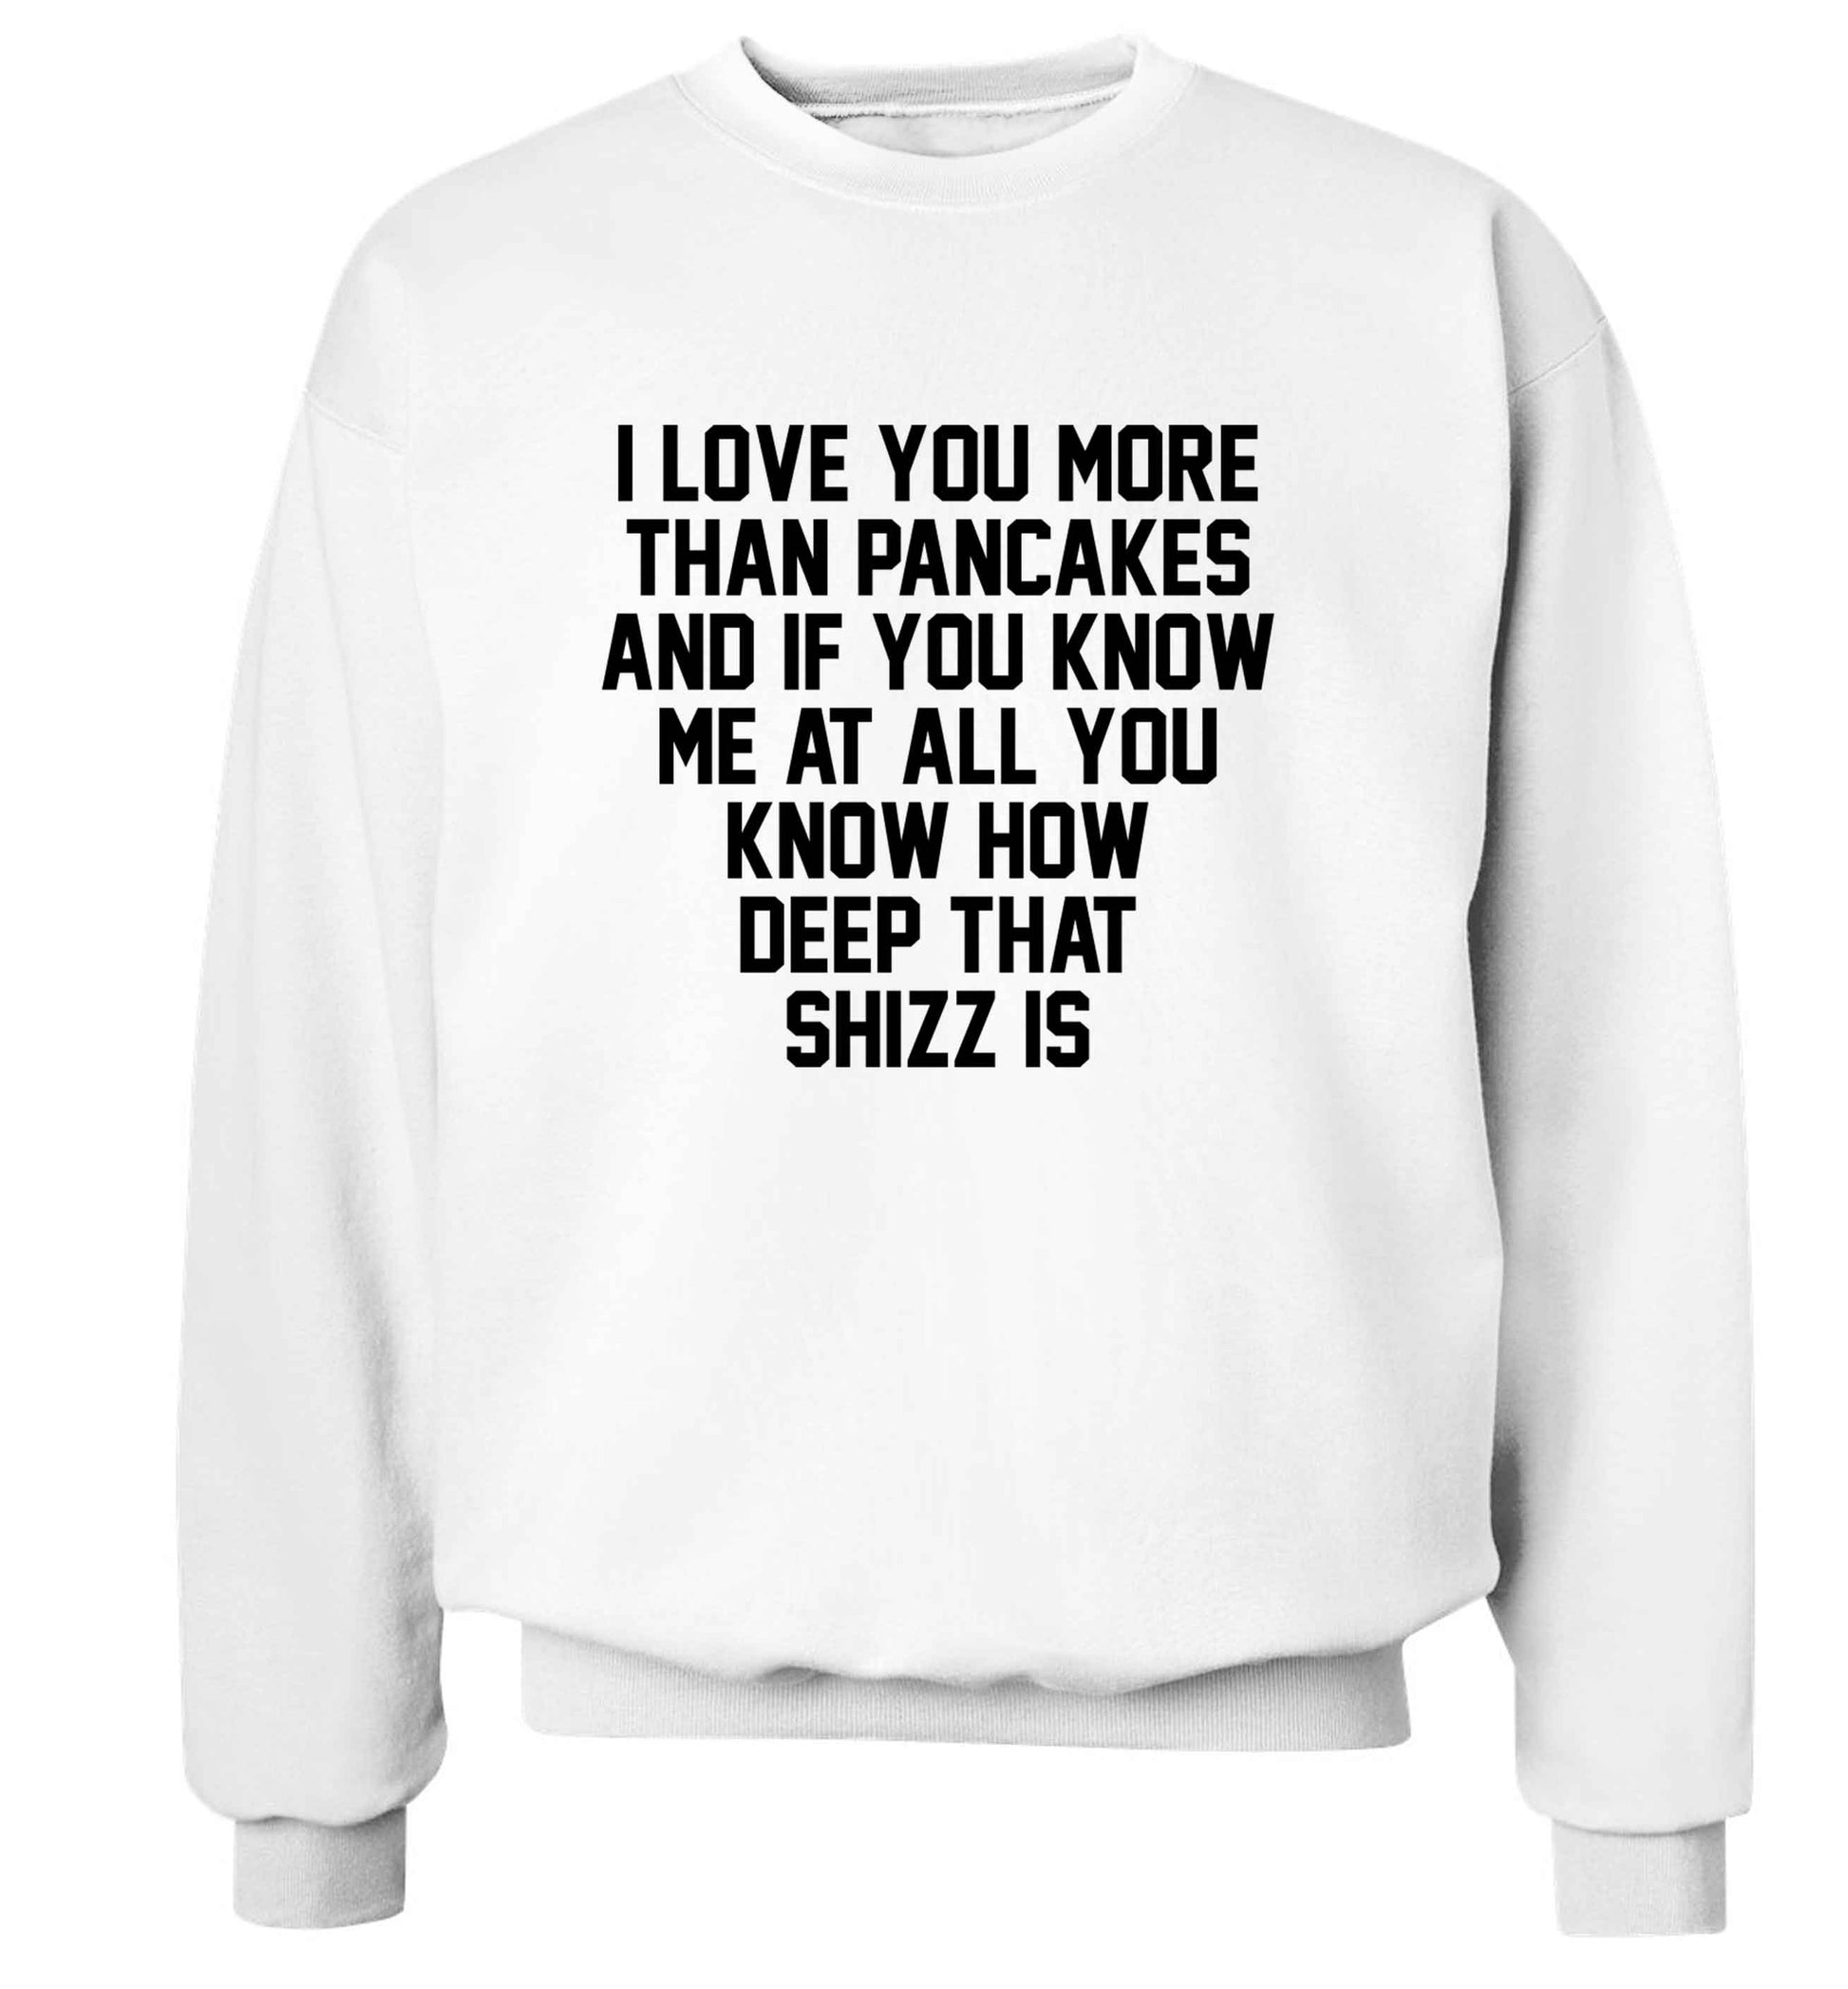 I love you more than pancakes and if you know me at all you know how deep that shizz is adult's unisex white sweater 2XL